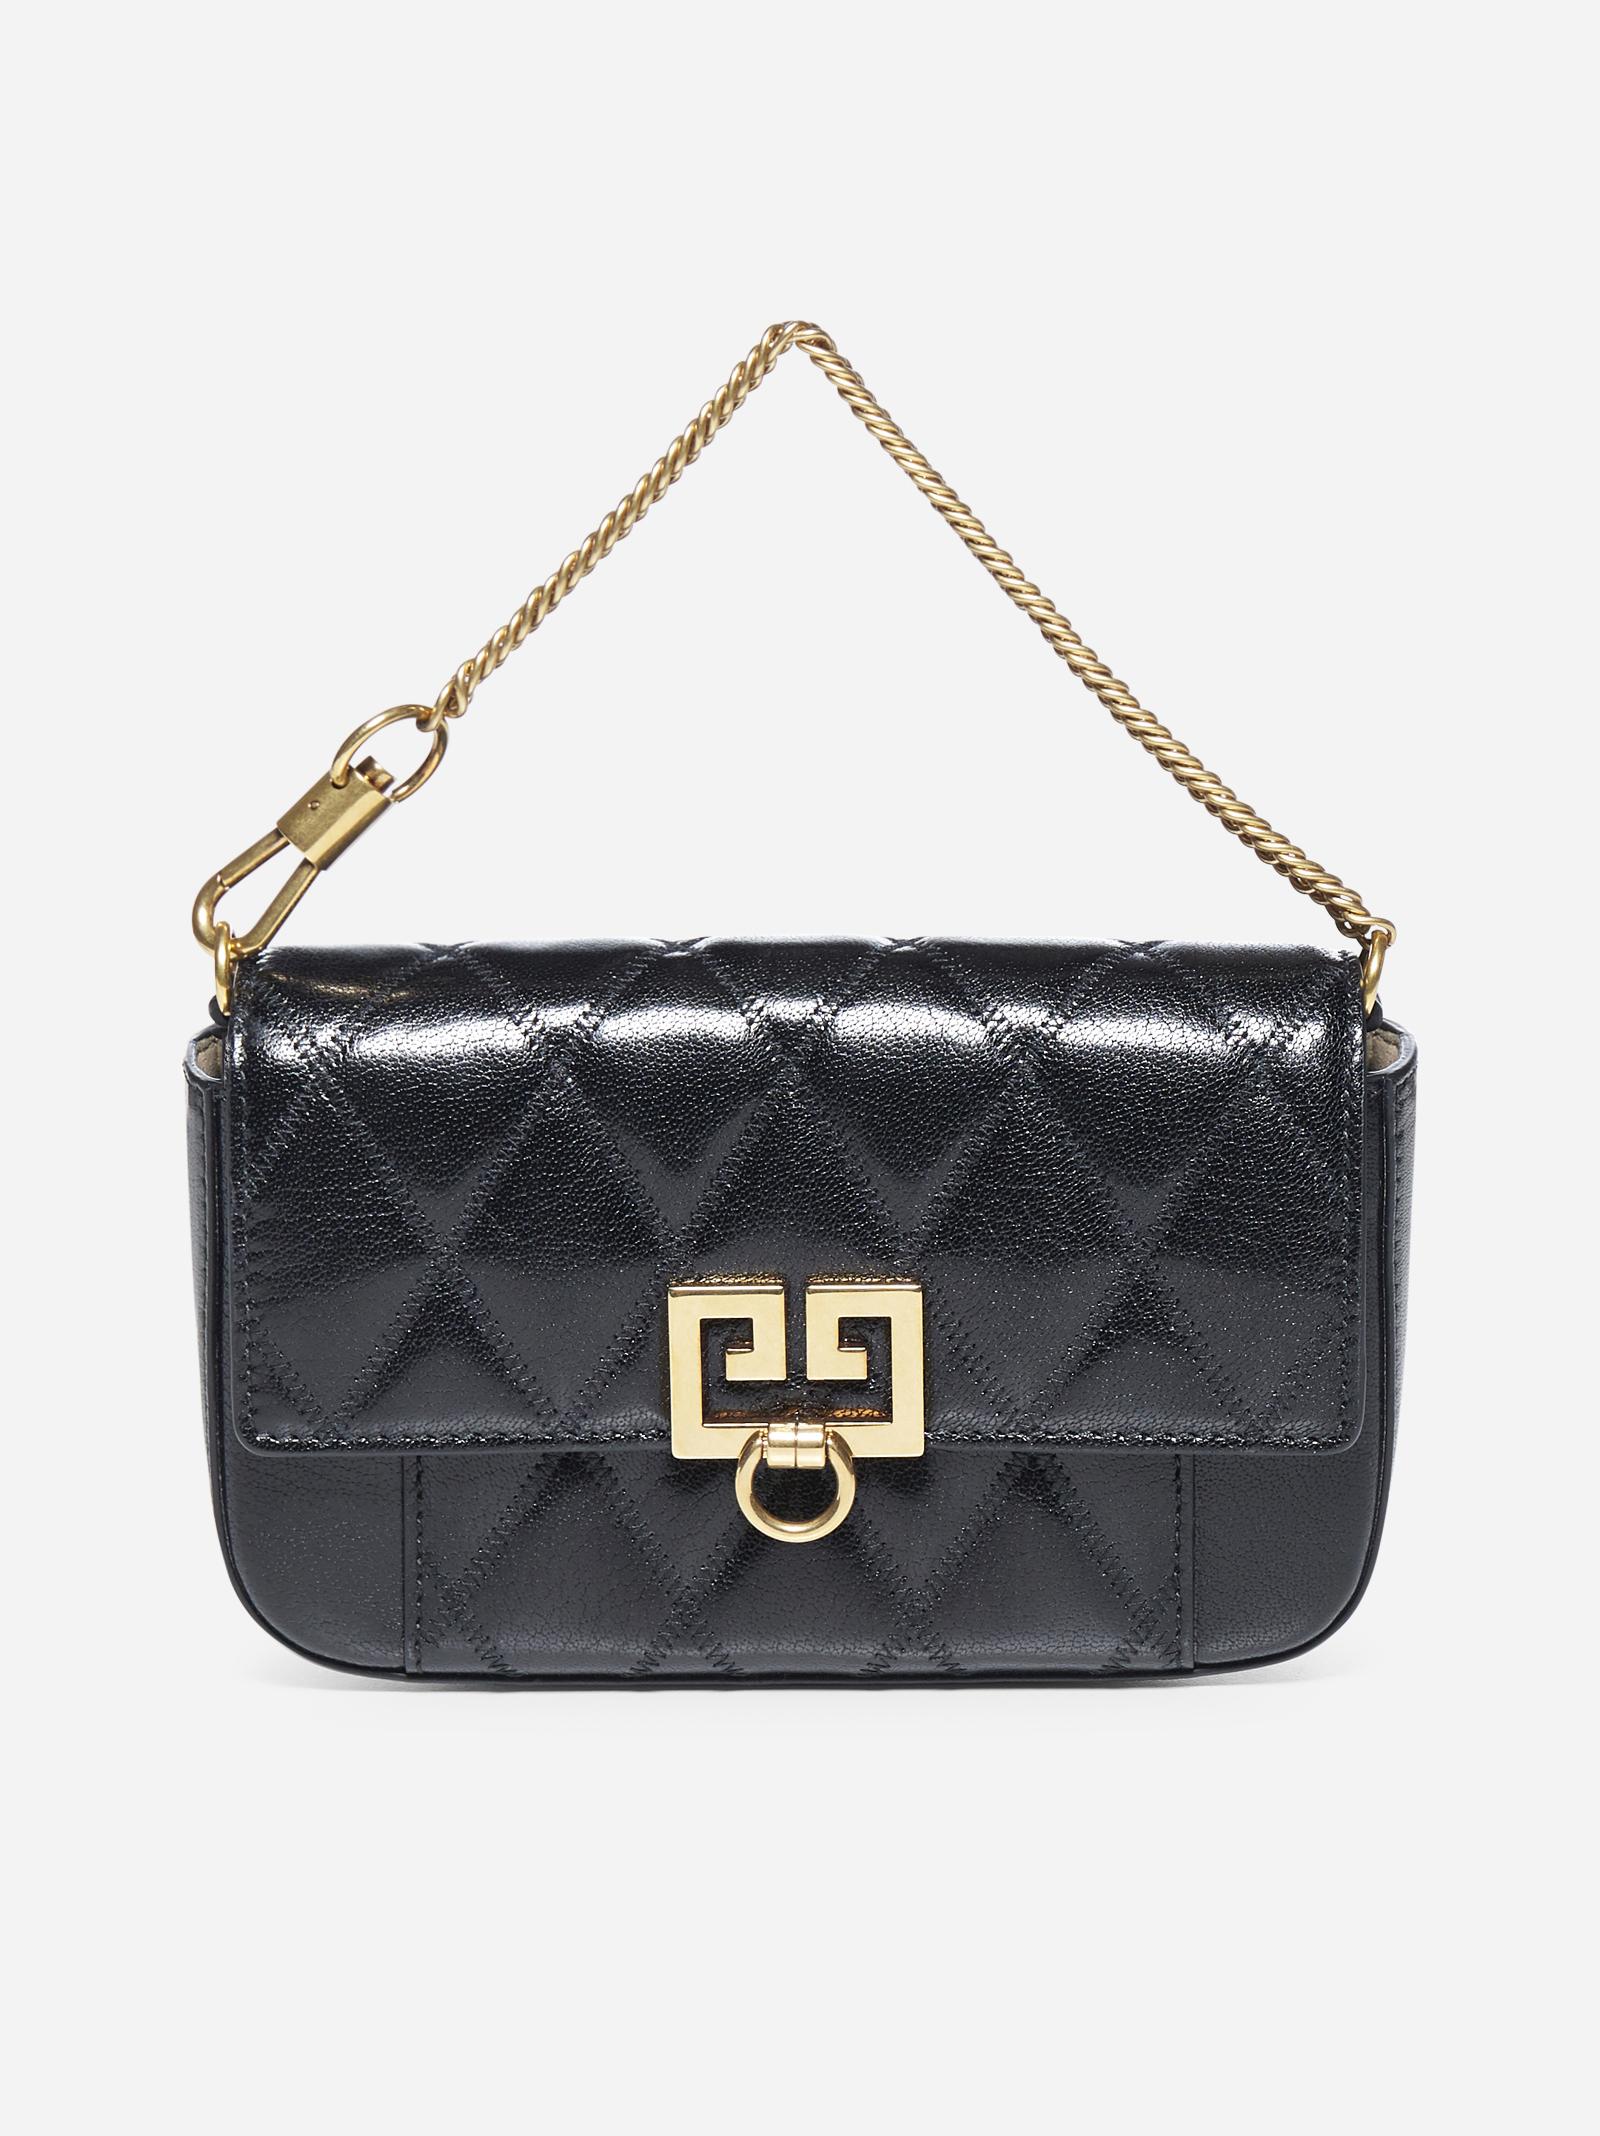 Givenchy Pocket Mini Quilted Leather Bag in Black - Save 19% - Lyst